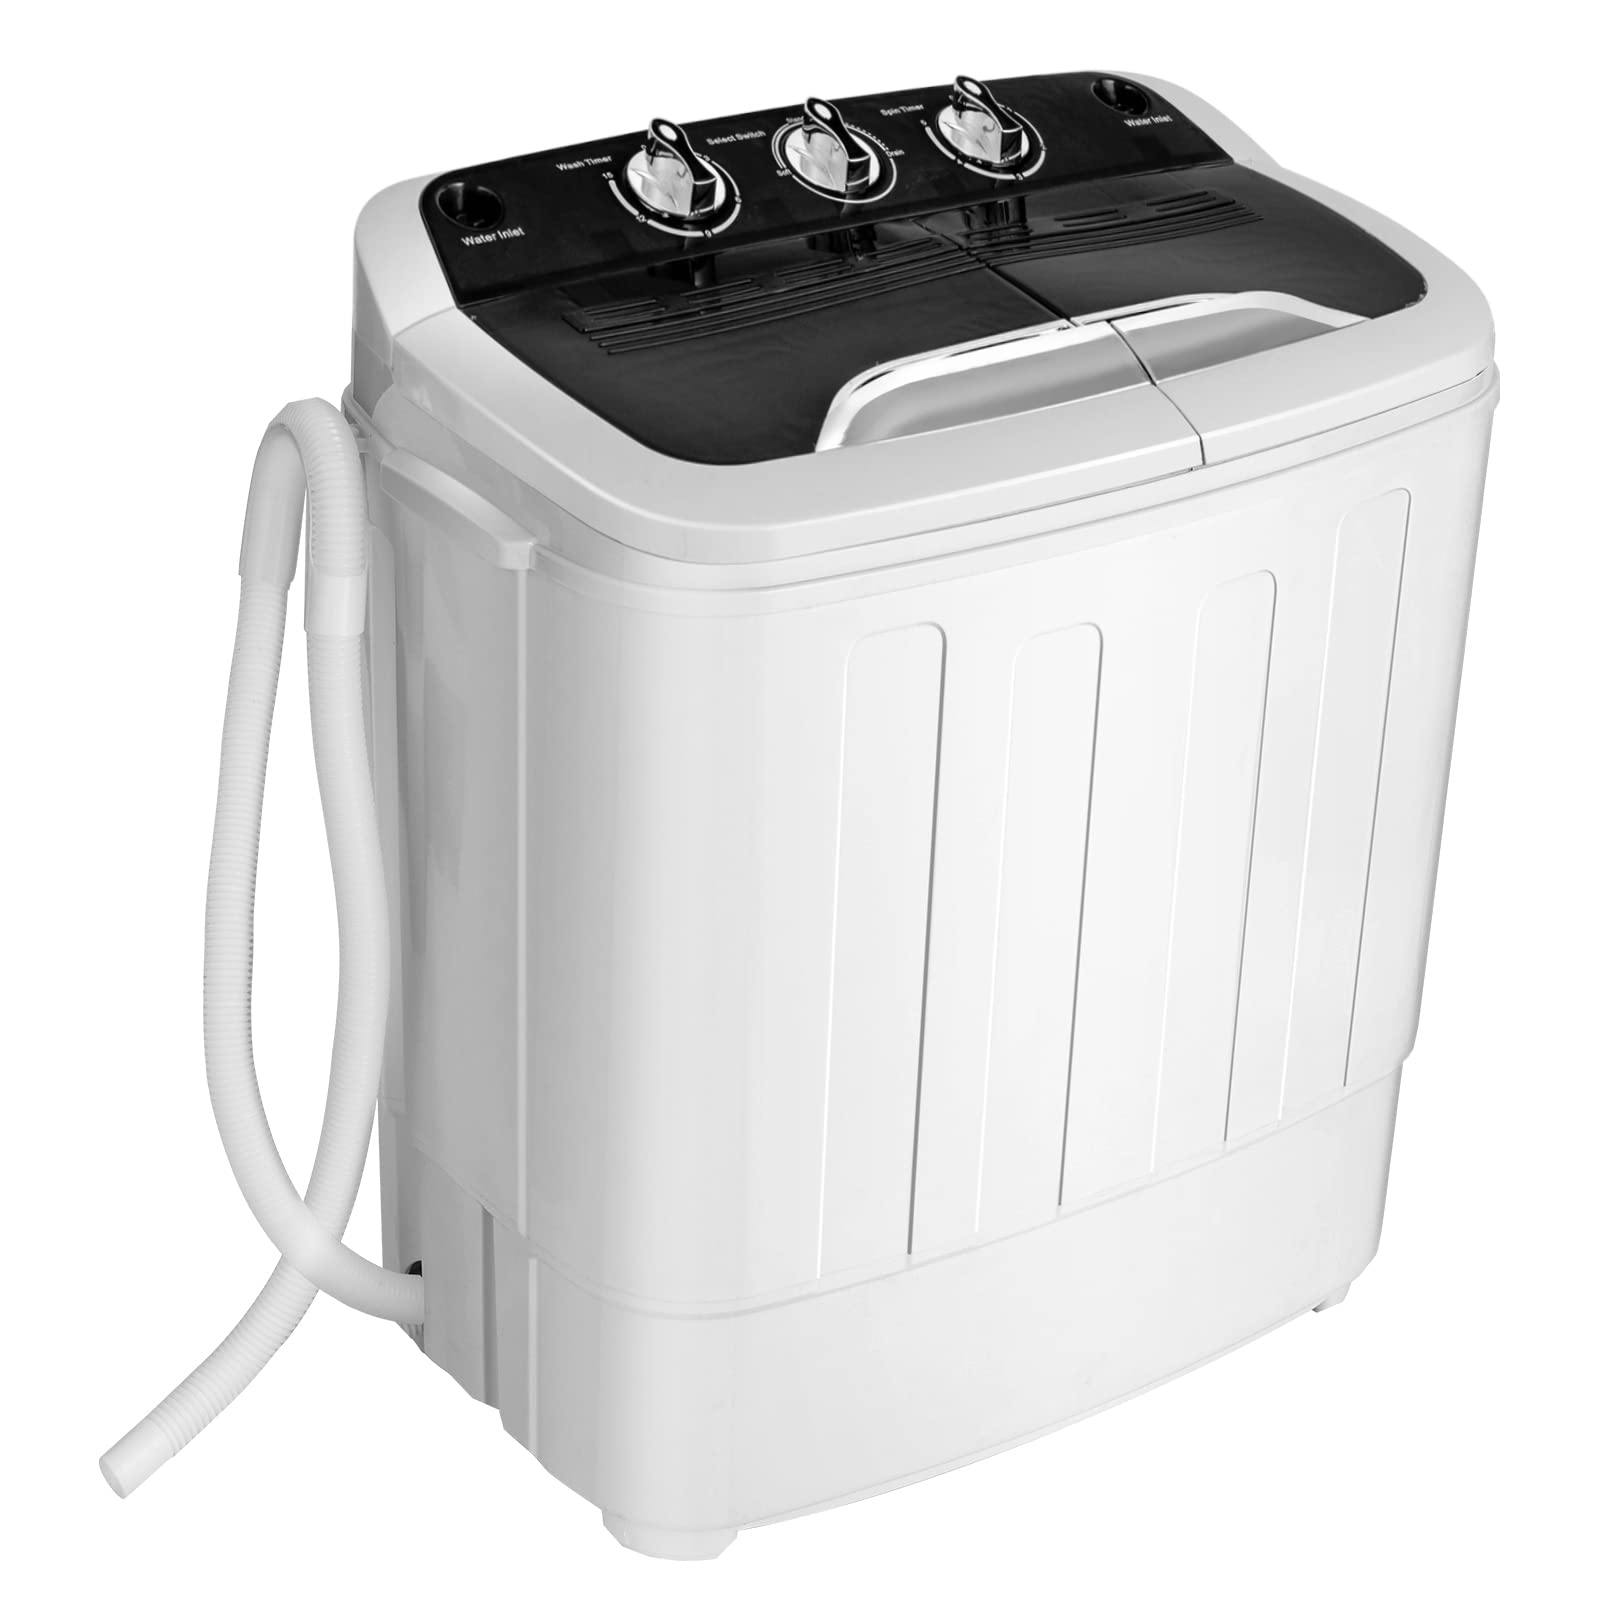 Giantex Full-Automatic Washing Machine, 7.7lbs Capacity Washer and Spinner Combo w/Built-In Barrel Light, Drain Pump & Long Hose, Compact Laundry